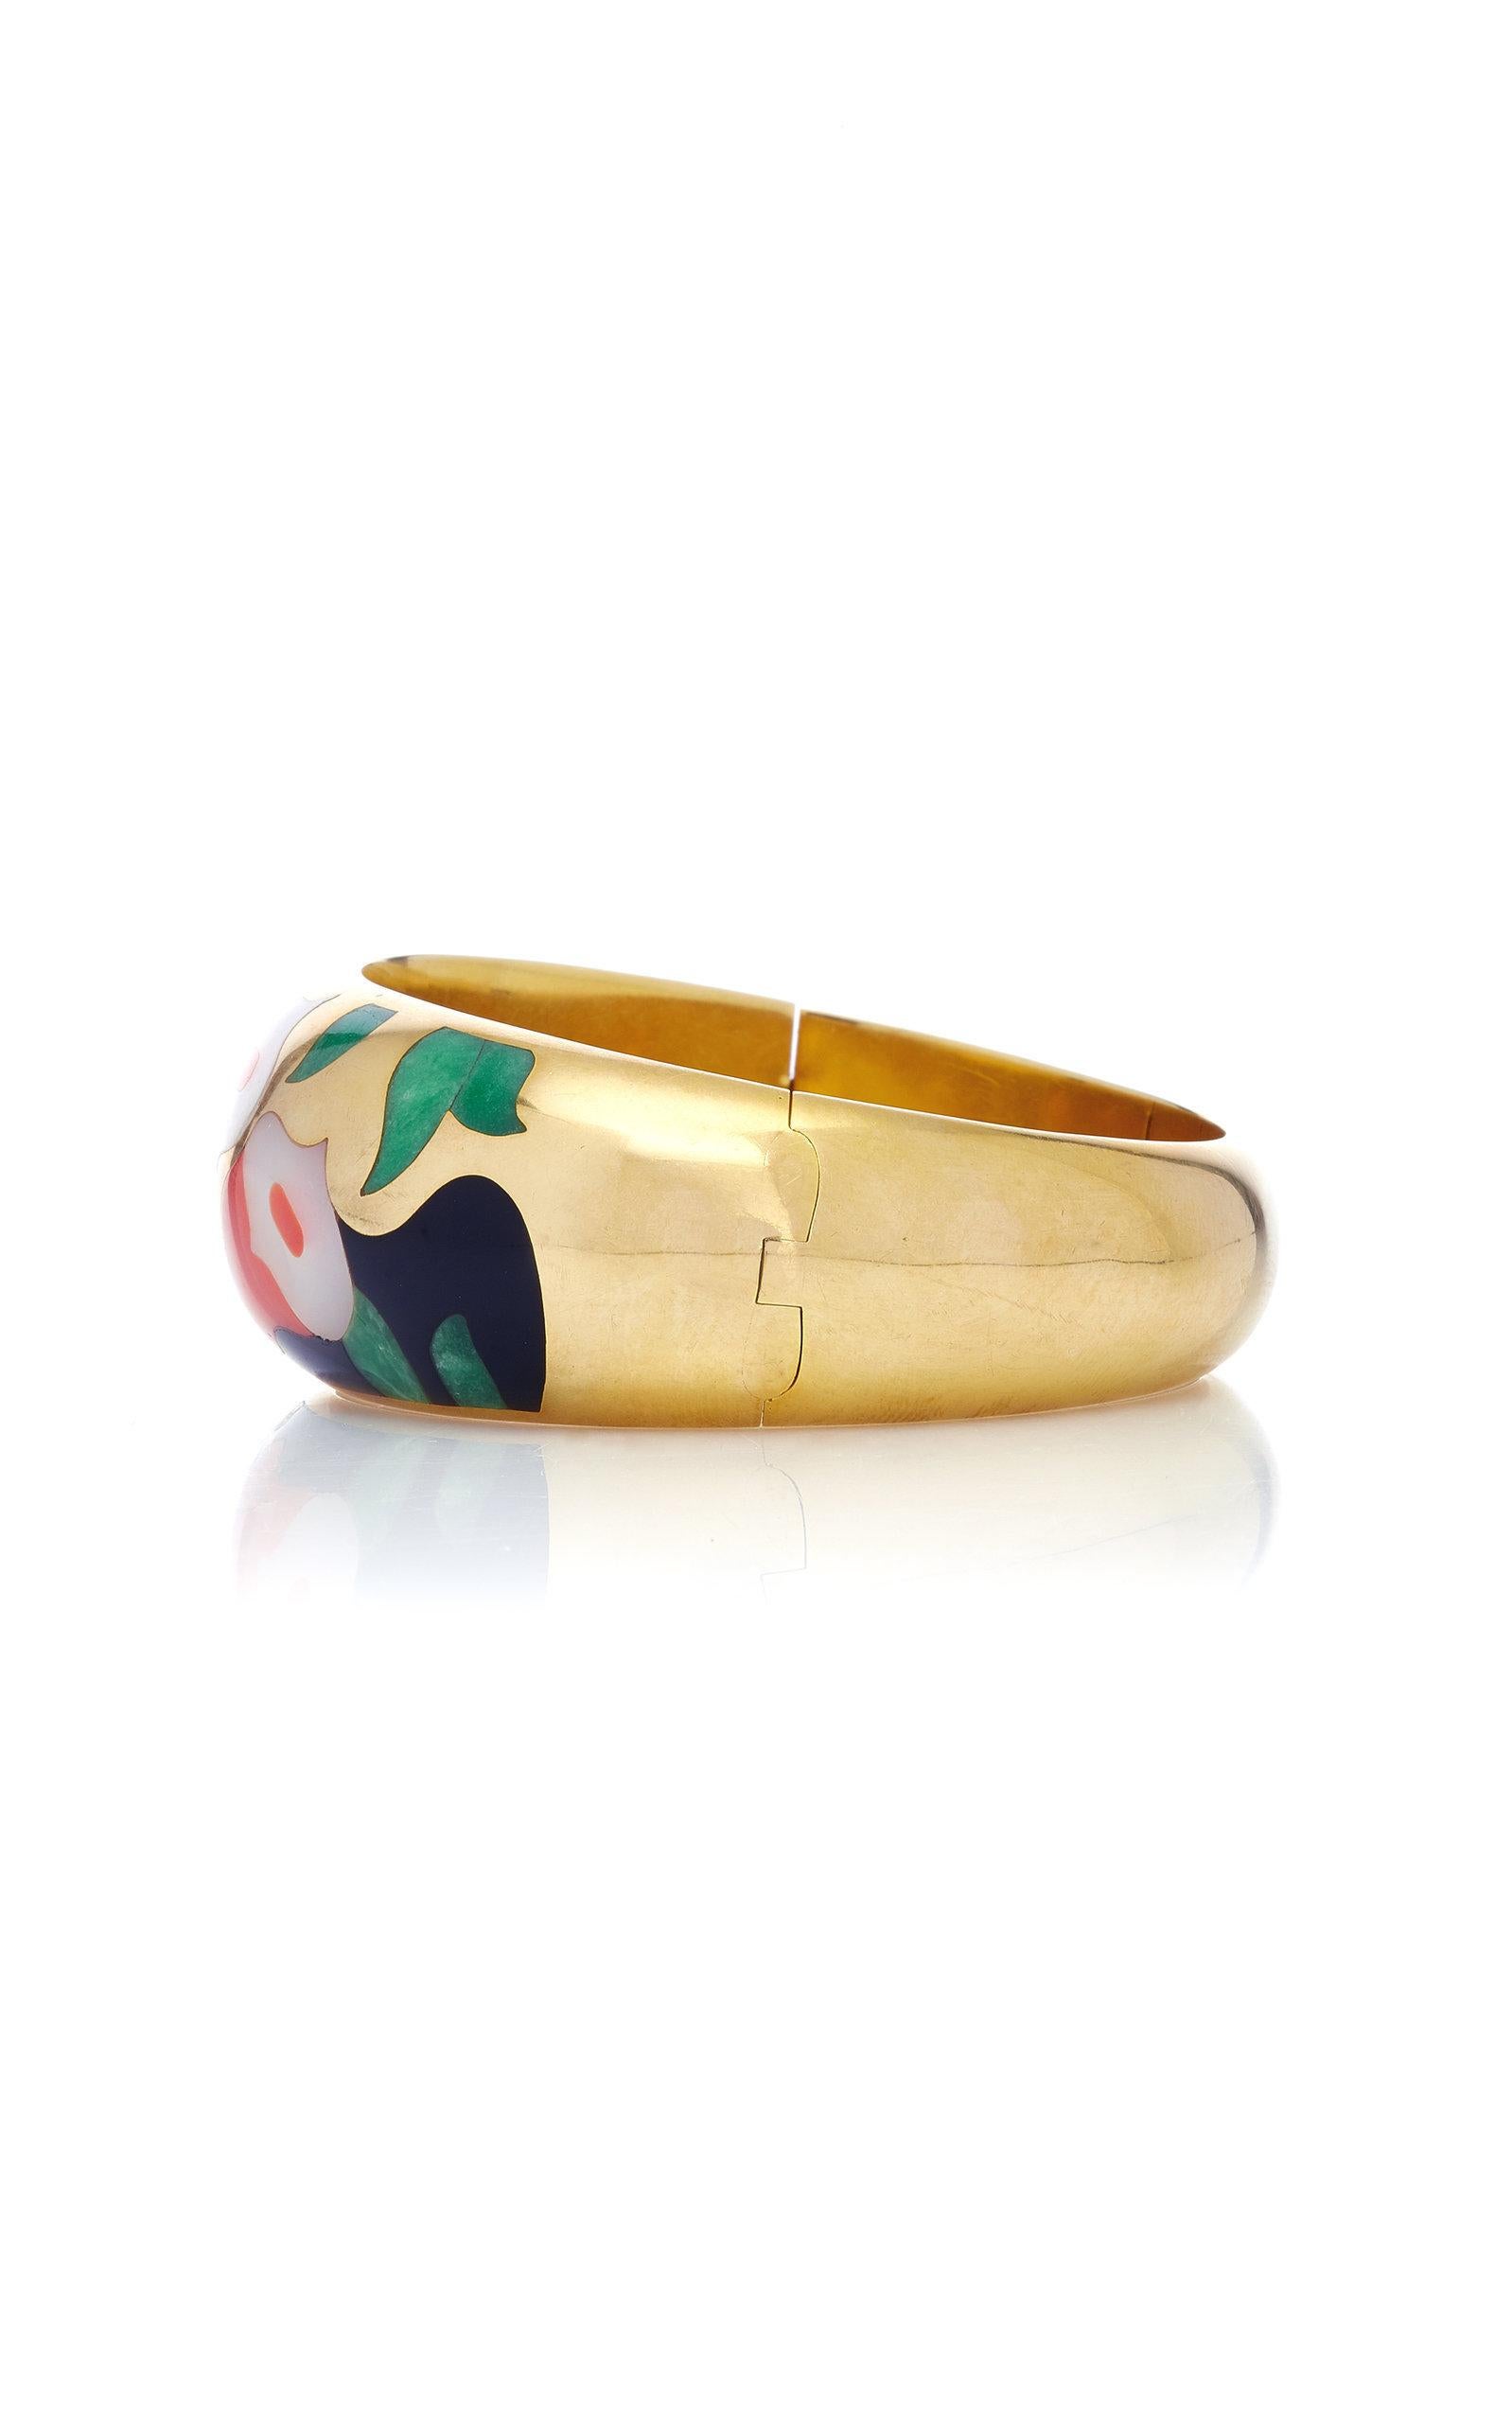 Asch Grossbardt bracelet in 14kt yellow gold with inlaid onyx, mother of pearl, coral and aventurine. Made in the US, circa 1970s.